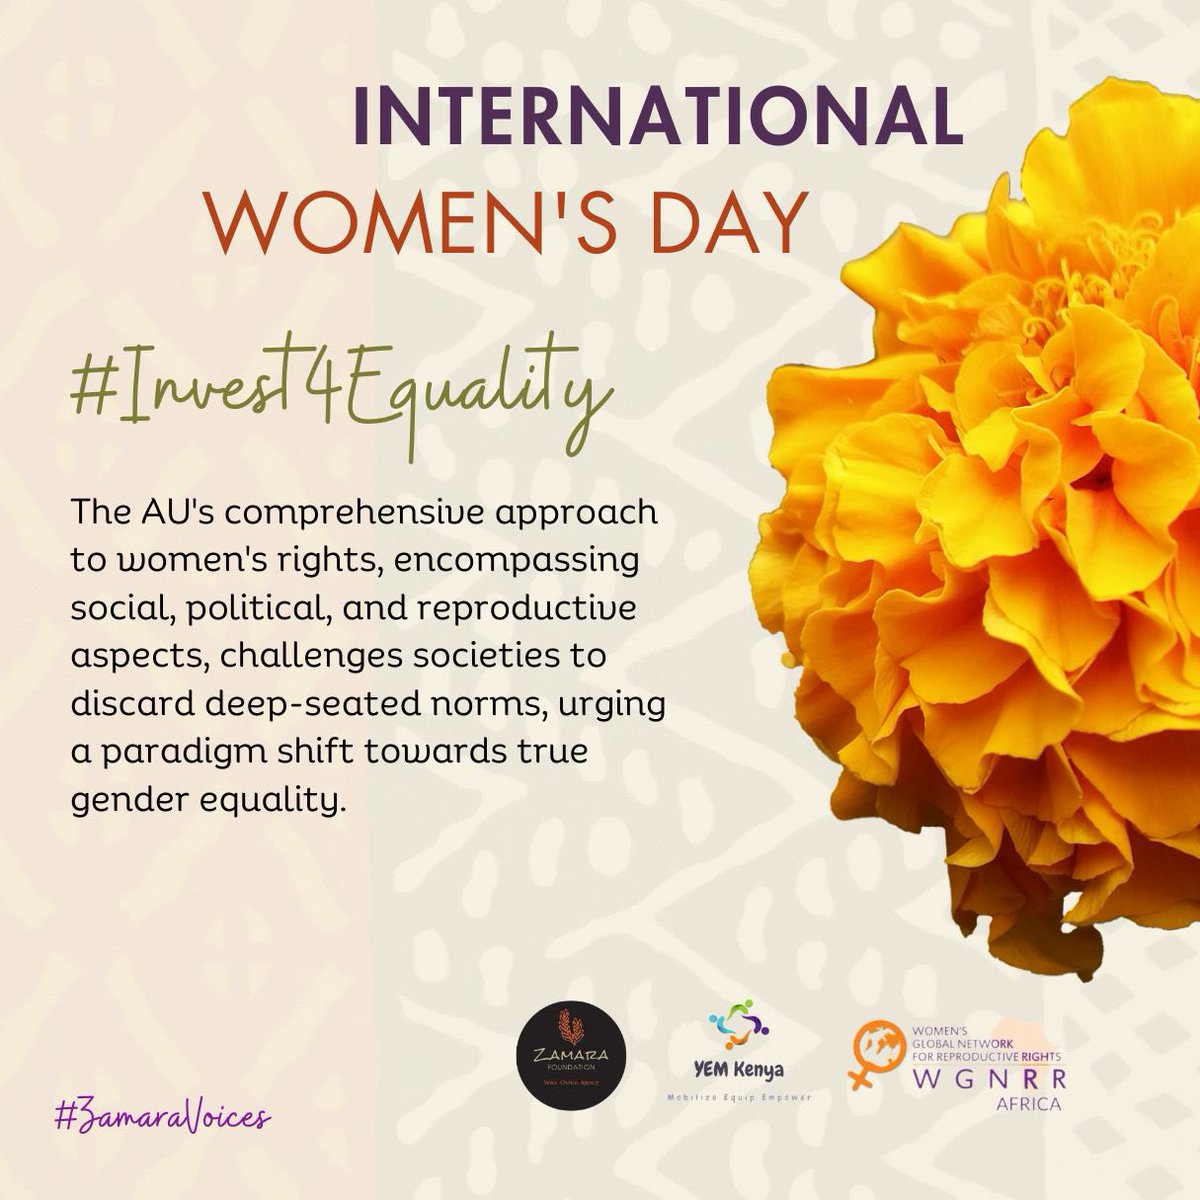 Ensuring initiatives are acessible to all women including those from marginalized communities and provide the necessary  support to address barriers they may face #Invest4Equality 
#ZamaraVoices 
@Zamara_fdn
@YEMKenya
@wgnrr_africa